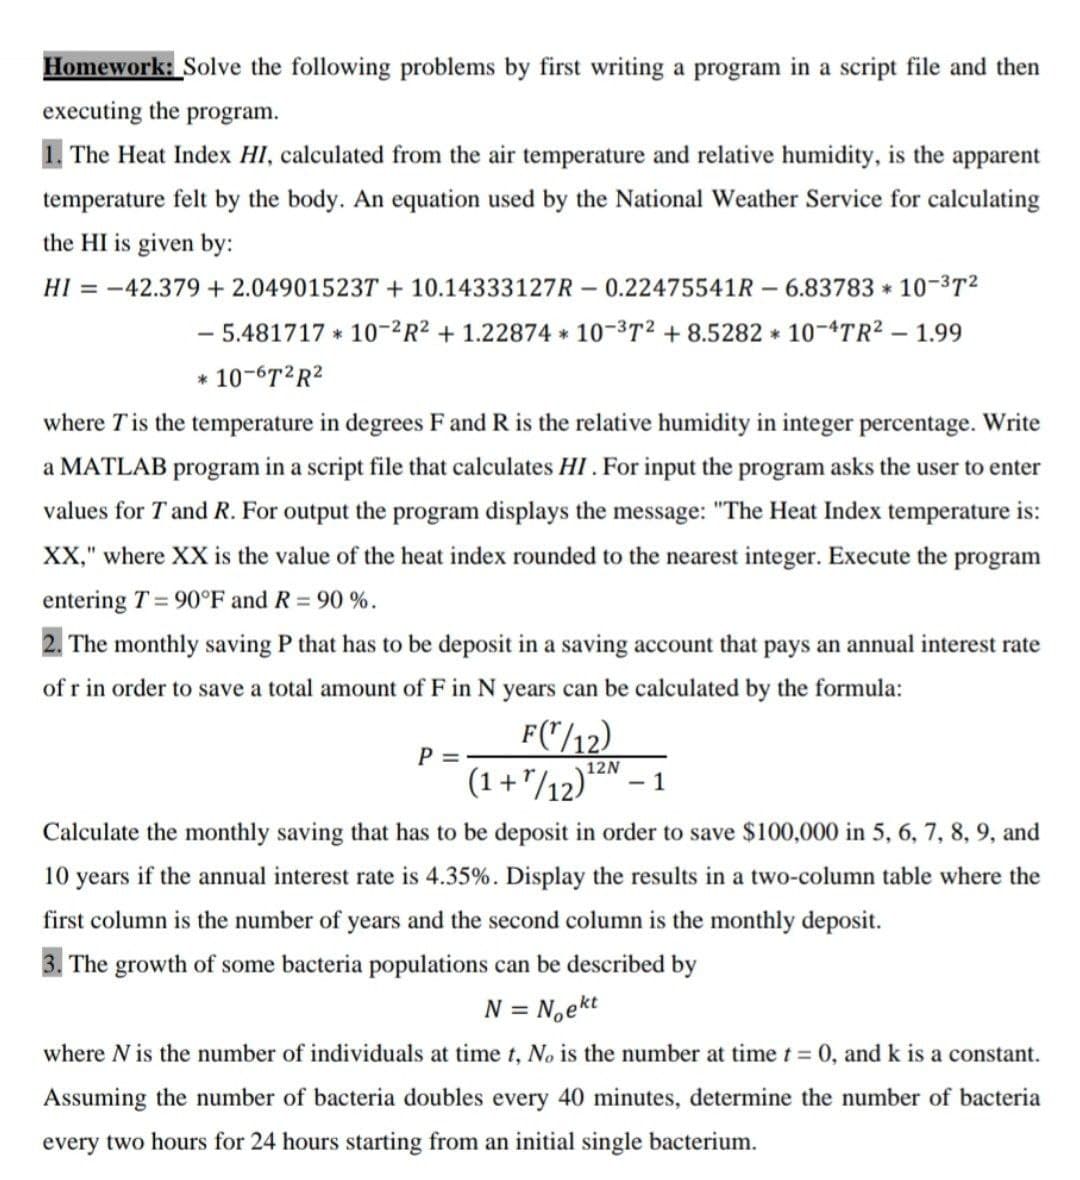 Homework: Solve the following problems by first writing a program in a script file and then
executing the program.
1. The Heat Index HI, calculated from the air temperature and relative humidity, is the apparent
temperature felt by the body. An equation used by the National Weather Service for calculating
the HI is given by:
HI = -42.379 + 2.049015237 + 10.14333127R – 0.22475541R – 6.83783 * 10-3T2
- 5.481717 * 10-2R² + 1.22874 * 10-3T2 + 8.5282 * 10-4TR2 – 1.99
* 10-6T2R2
where Tis the temperature in degrees Fand R is the relative humidity in integer percentage. Write
a MATLAB program in a script file that calculates HI. For input the program asks the user to enter
values for T and R. For output the program displays the message: "The Heat Index temperature is:
XX," where XX is the value of the heat index rounded to the nearest integer. Execute the program
entering T = 90°F and R = 90 %.
2. The monthly saving P that has to be deposit in a saving account that pays an annual interest rate
of r in order to save a total amount of F in N years can be calculated by the formula:
F("/12)
P = -
(1+"/12)*
12N
- 1
Calculate the monthly saving that has to be deposit in order to save $100,000 in 5, 6, 7, 8, 9, and
10 years if the annual interest rate
4.35%. Display the results in a two-column table where the
first column is the number of years and the second column is the monthly deposit.
3. The growth of some bacteria populations can be described by
N = N,ekt
where N is the number of individuals at time t, No is the number at time t = 0, and k is a constant.
Assuming the number of bacteria doubles every 40 minutes, determine the number of bacteria
every two hours for 24 hours starting from an initial single bacterium.
